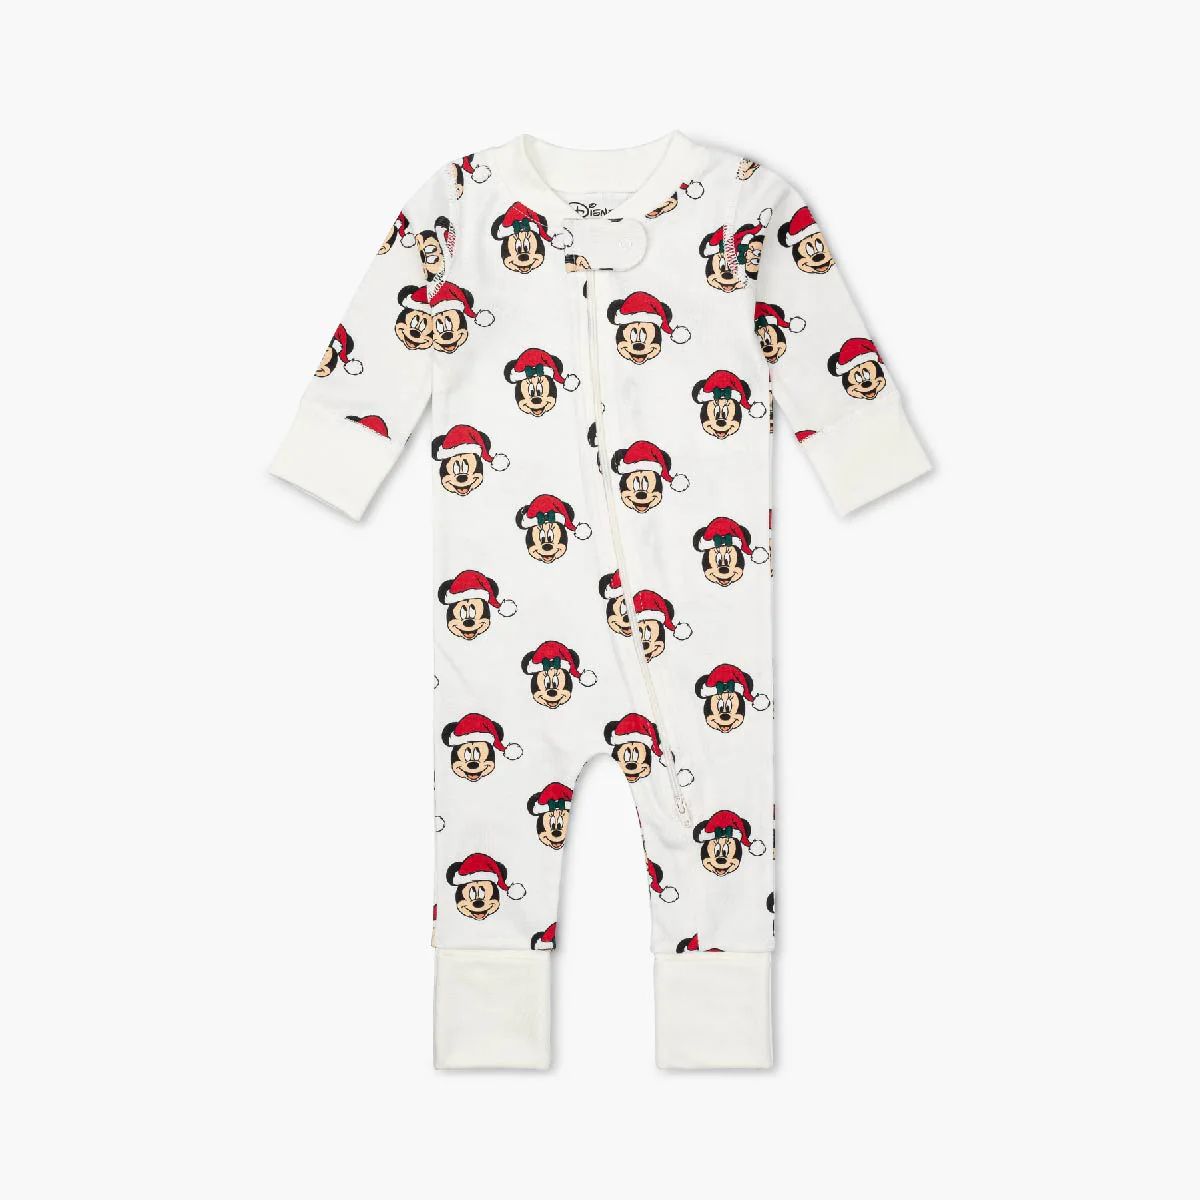 Monica + Andy - One-Piece Baby Pajamas | Monica + Andy